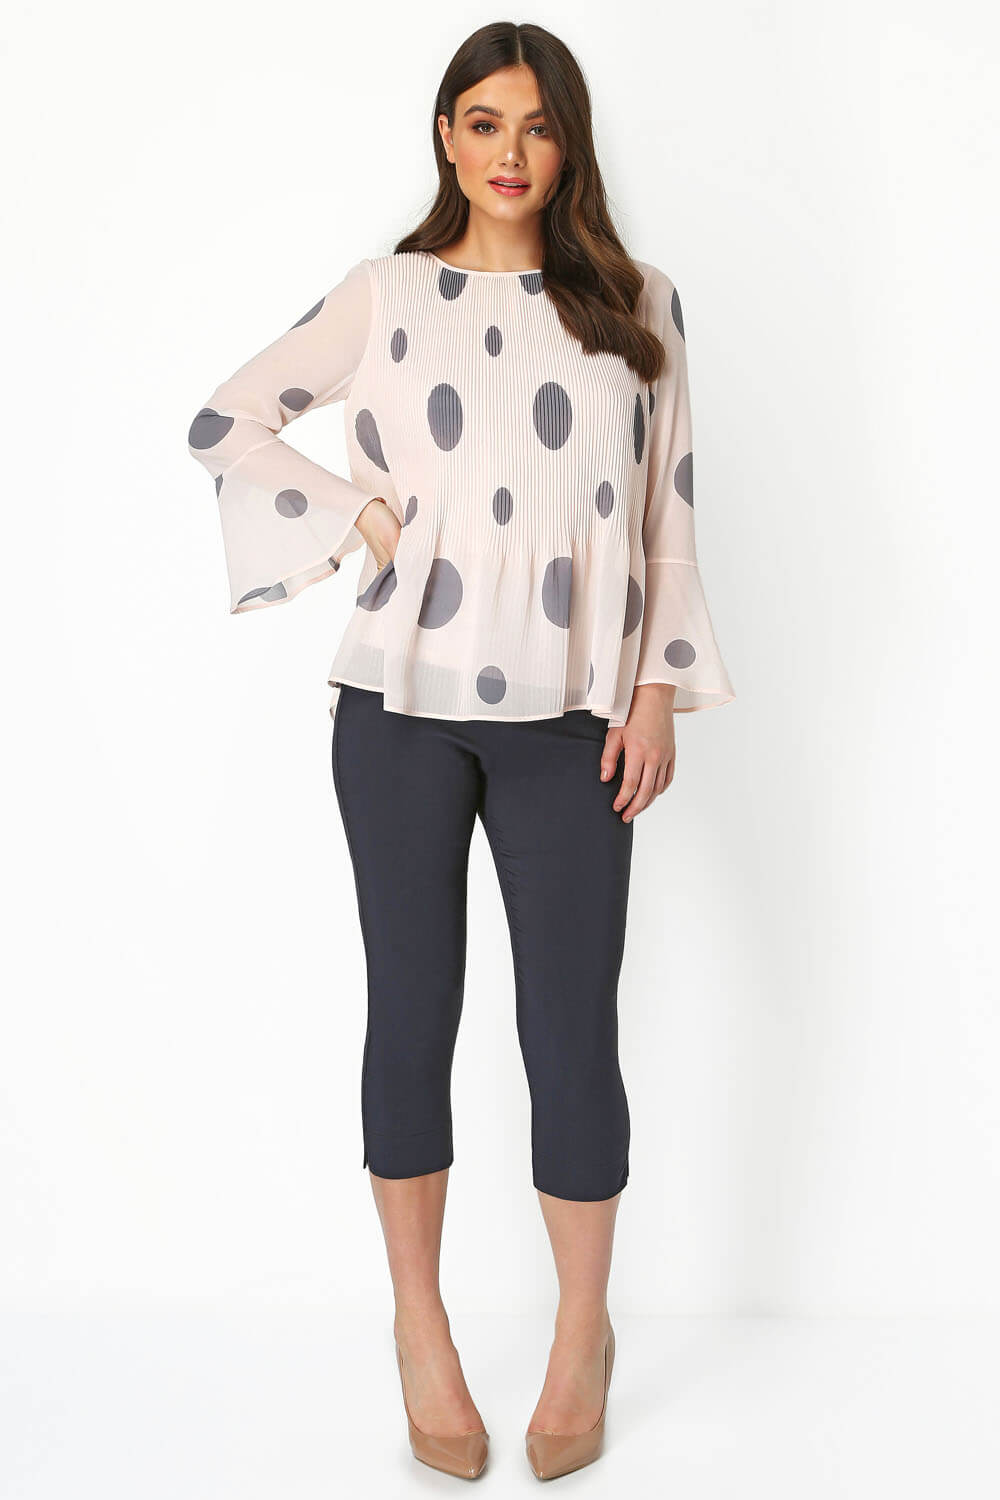 PINK Spot Print Pleated top , Image 2 of 8